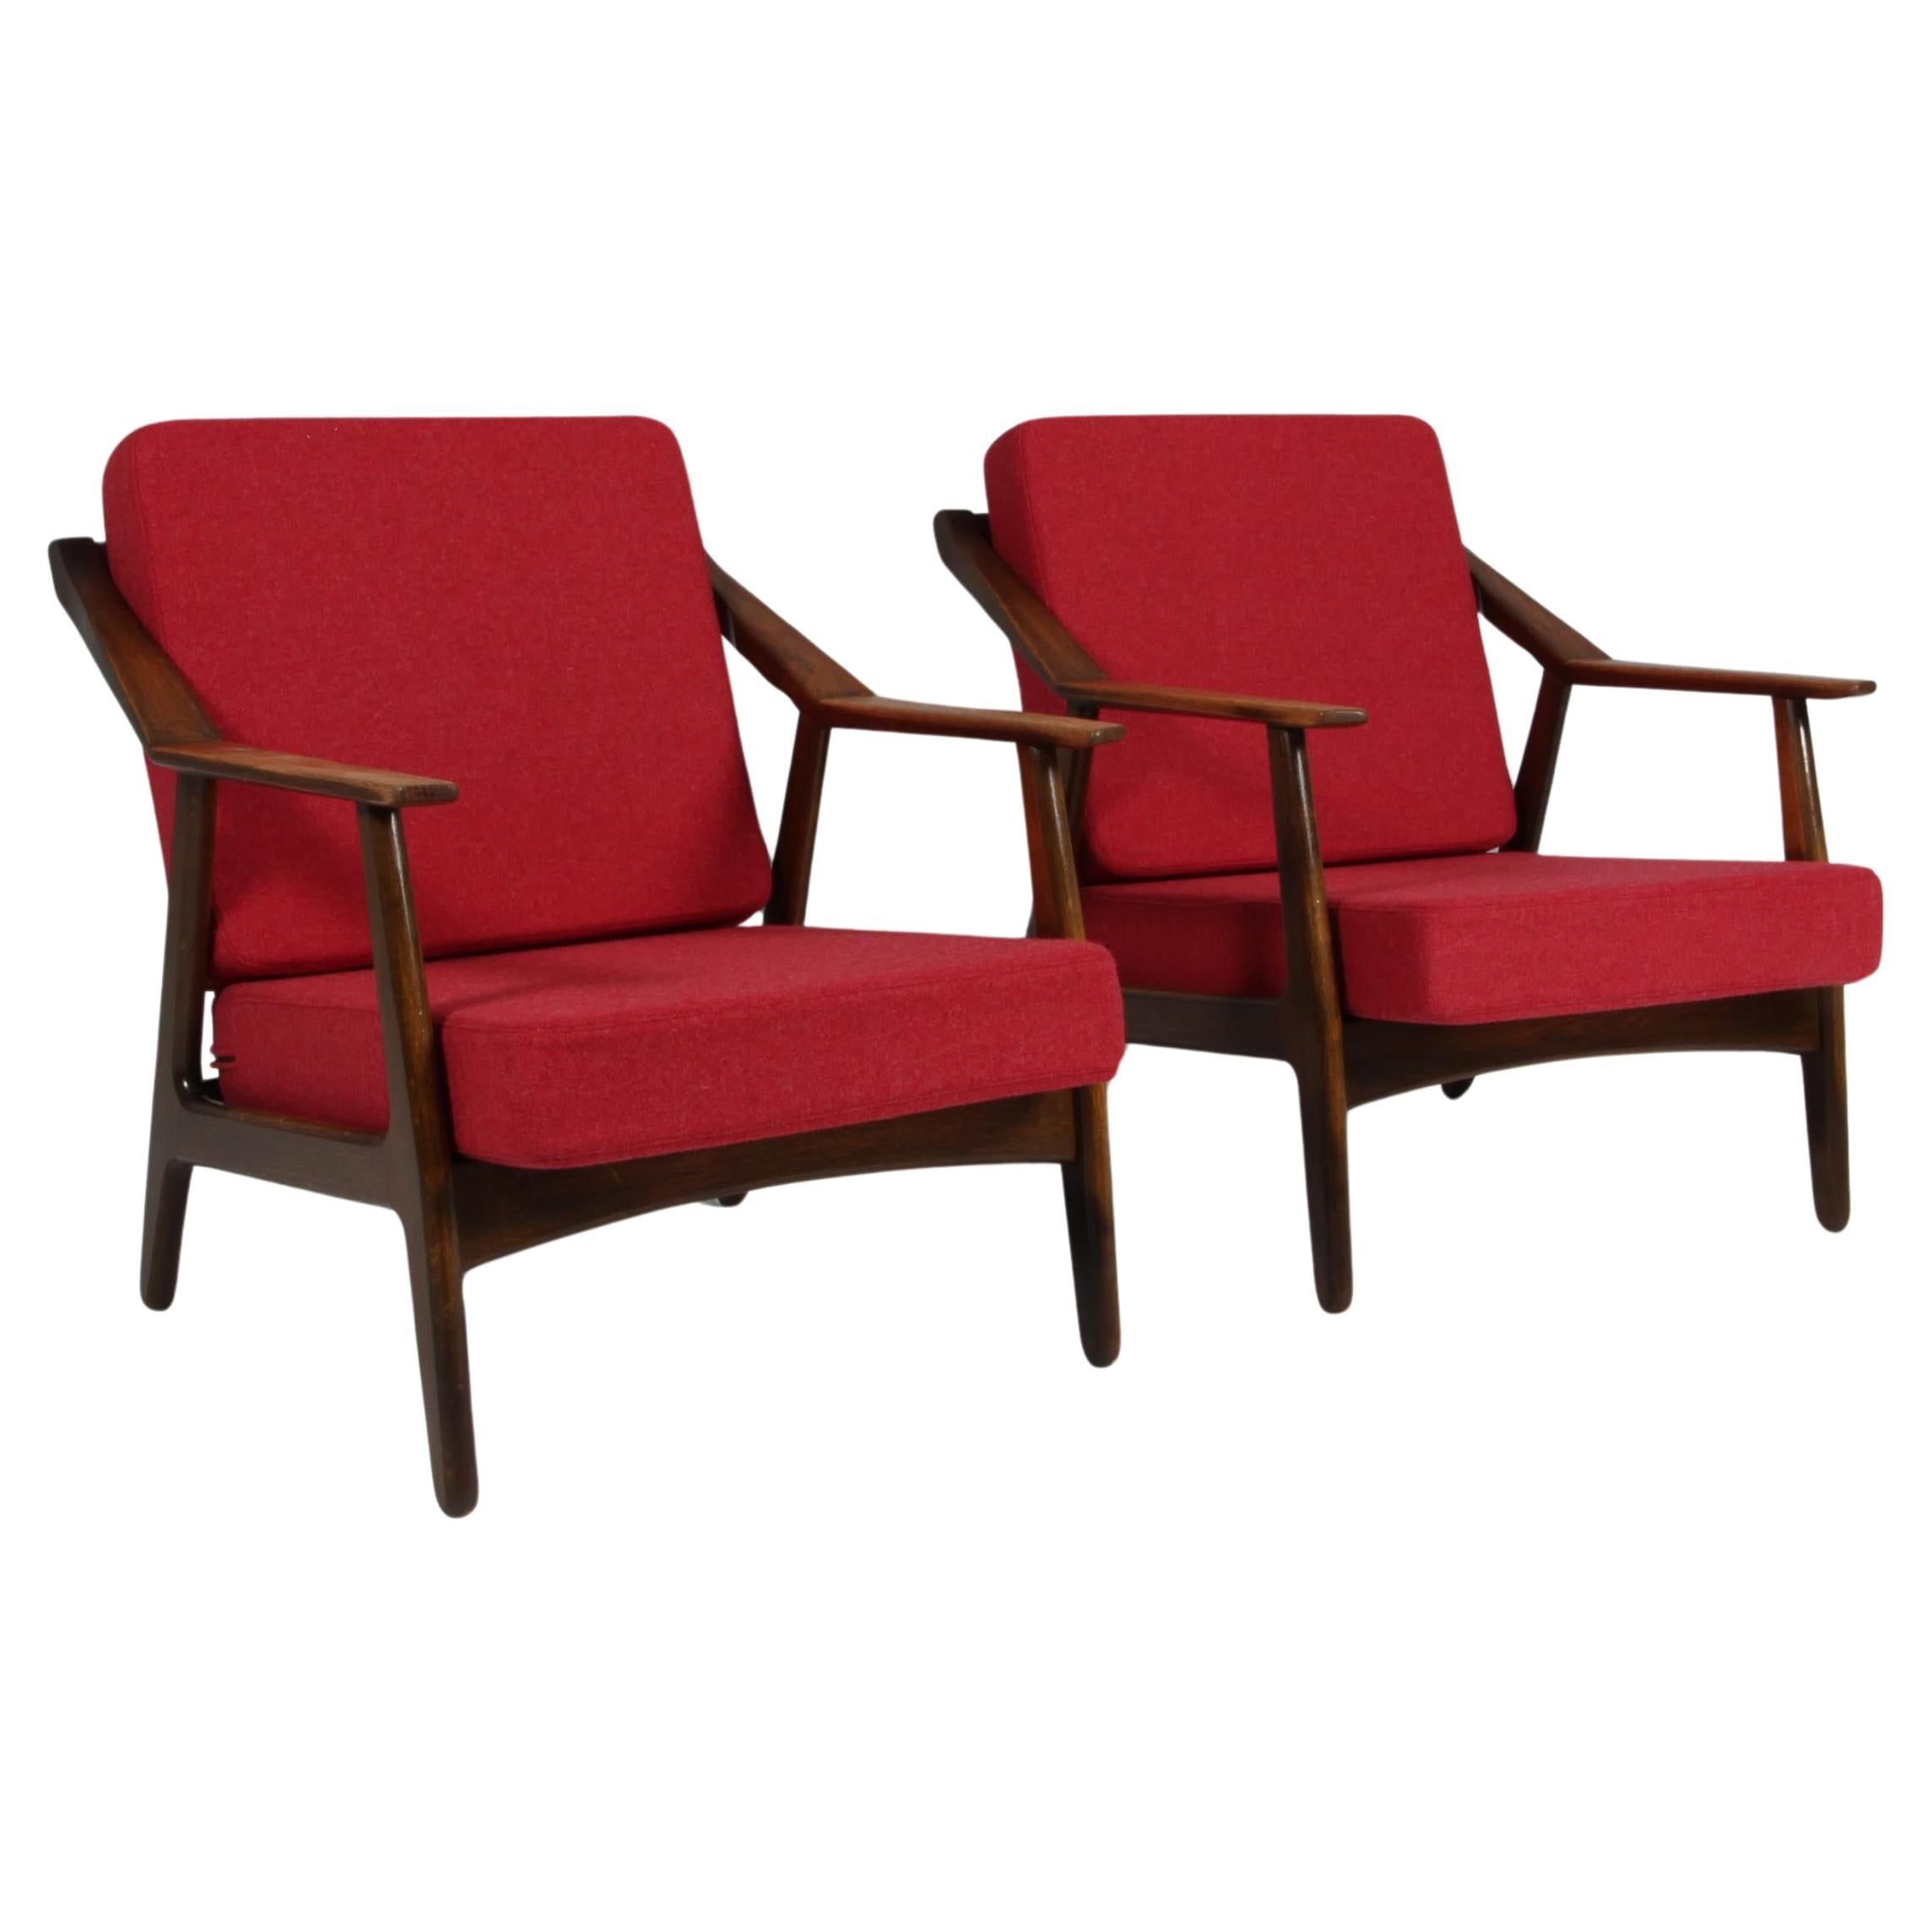 H. Brockmann Petersen pair of Lounge Chairs For Sale